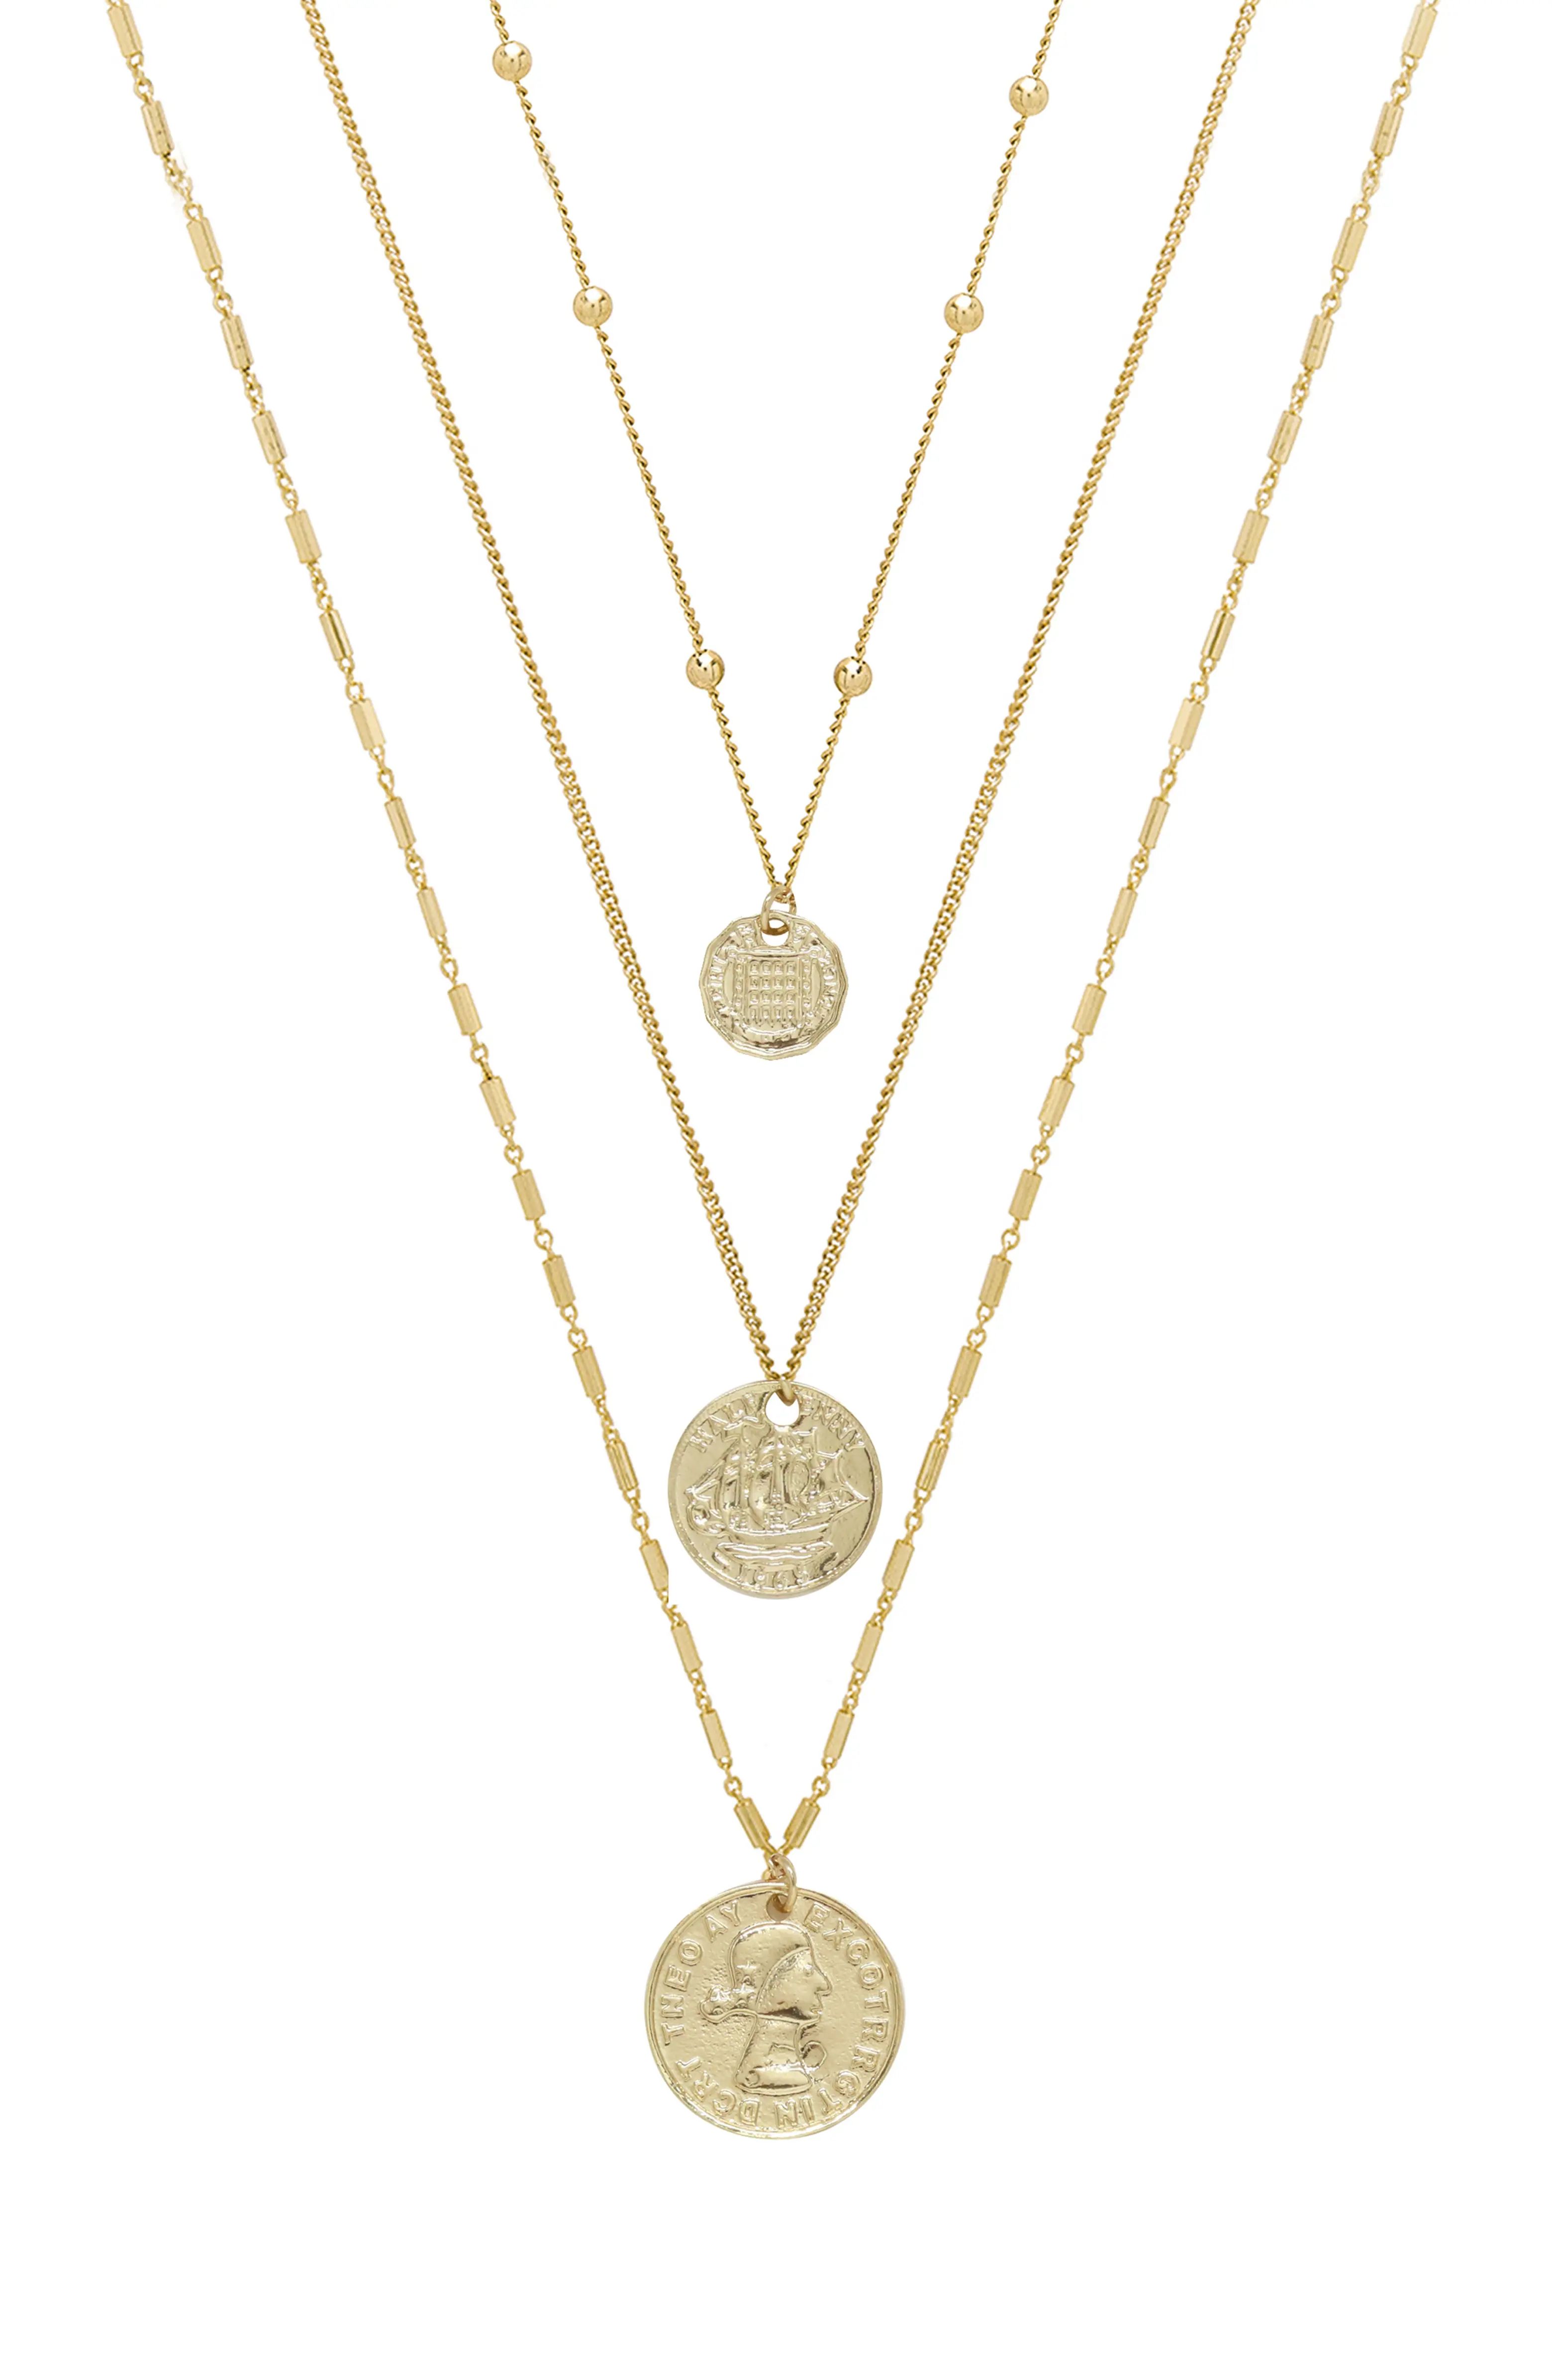 Set of 3 Coin Pendant Necklaces | Nordstrom